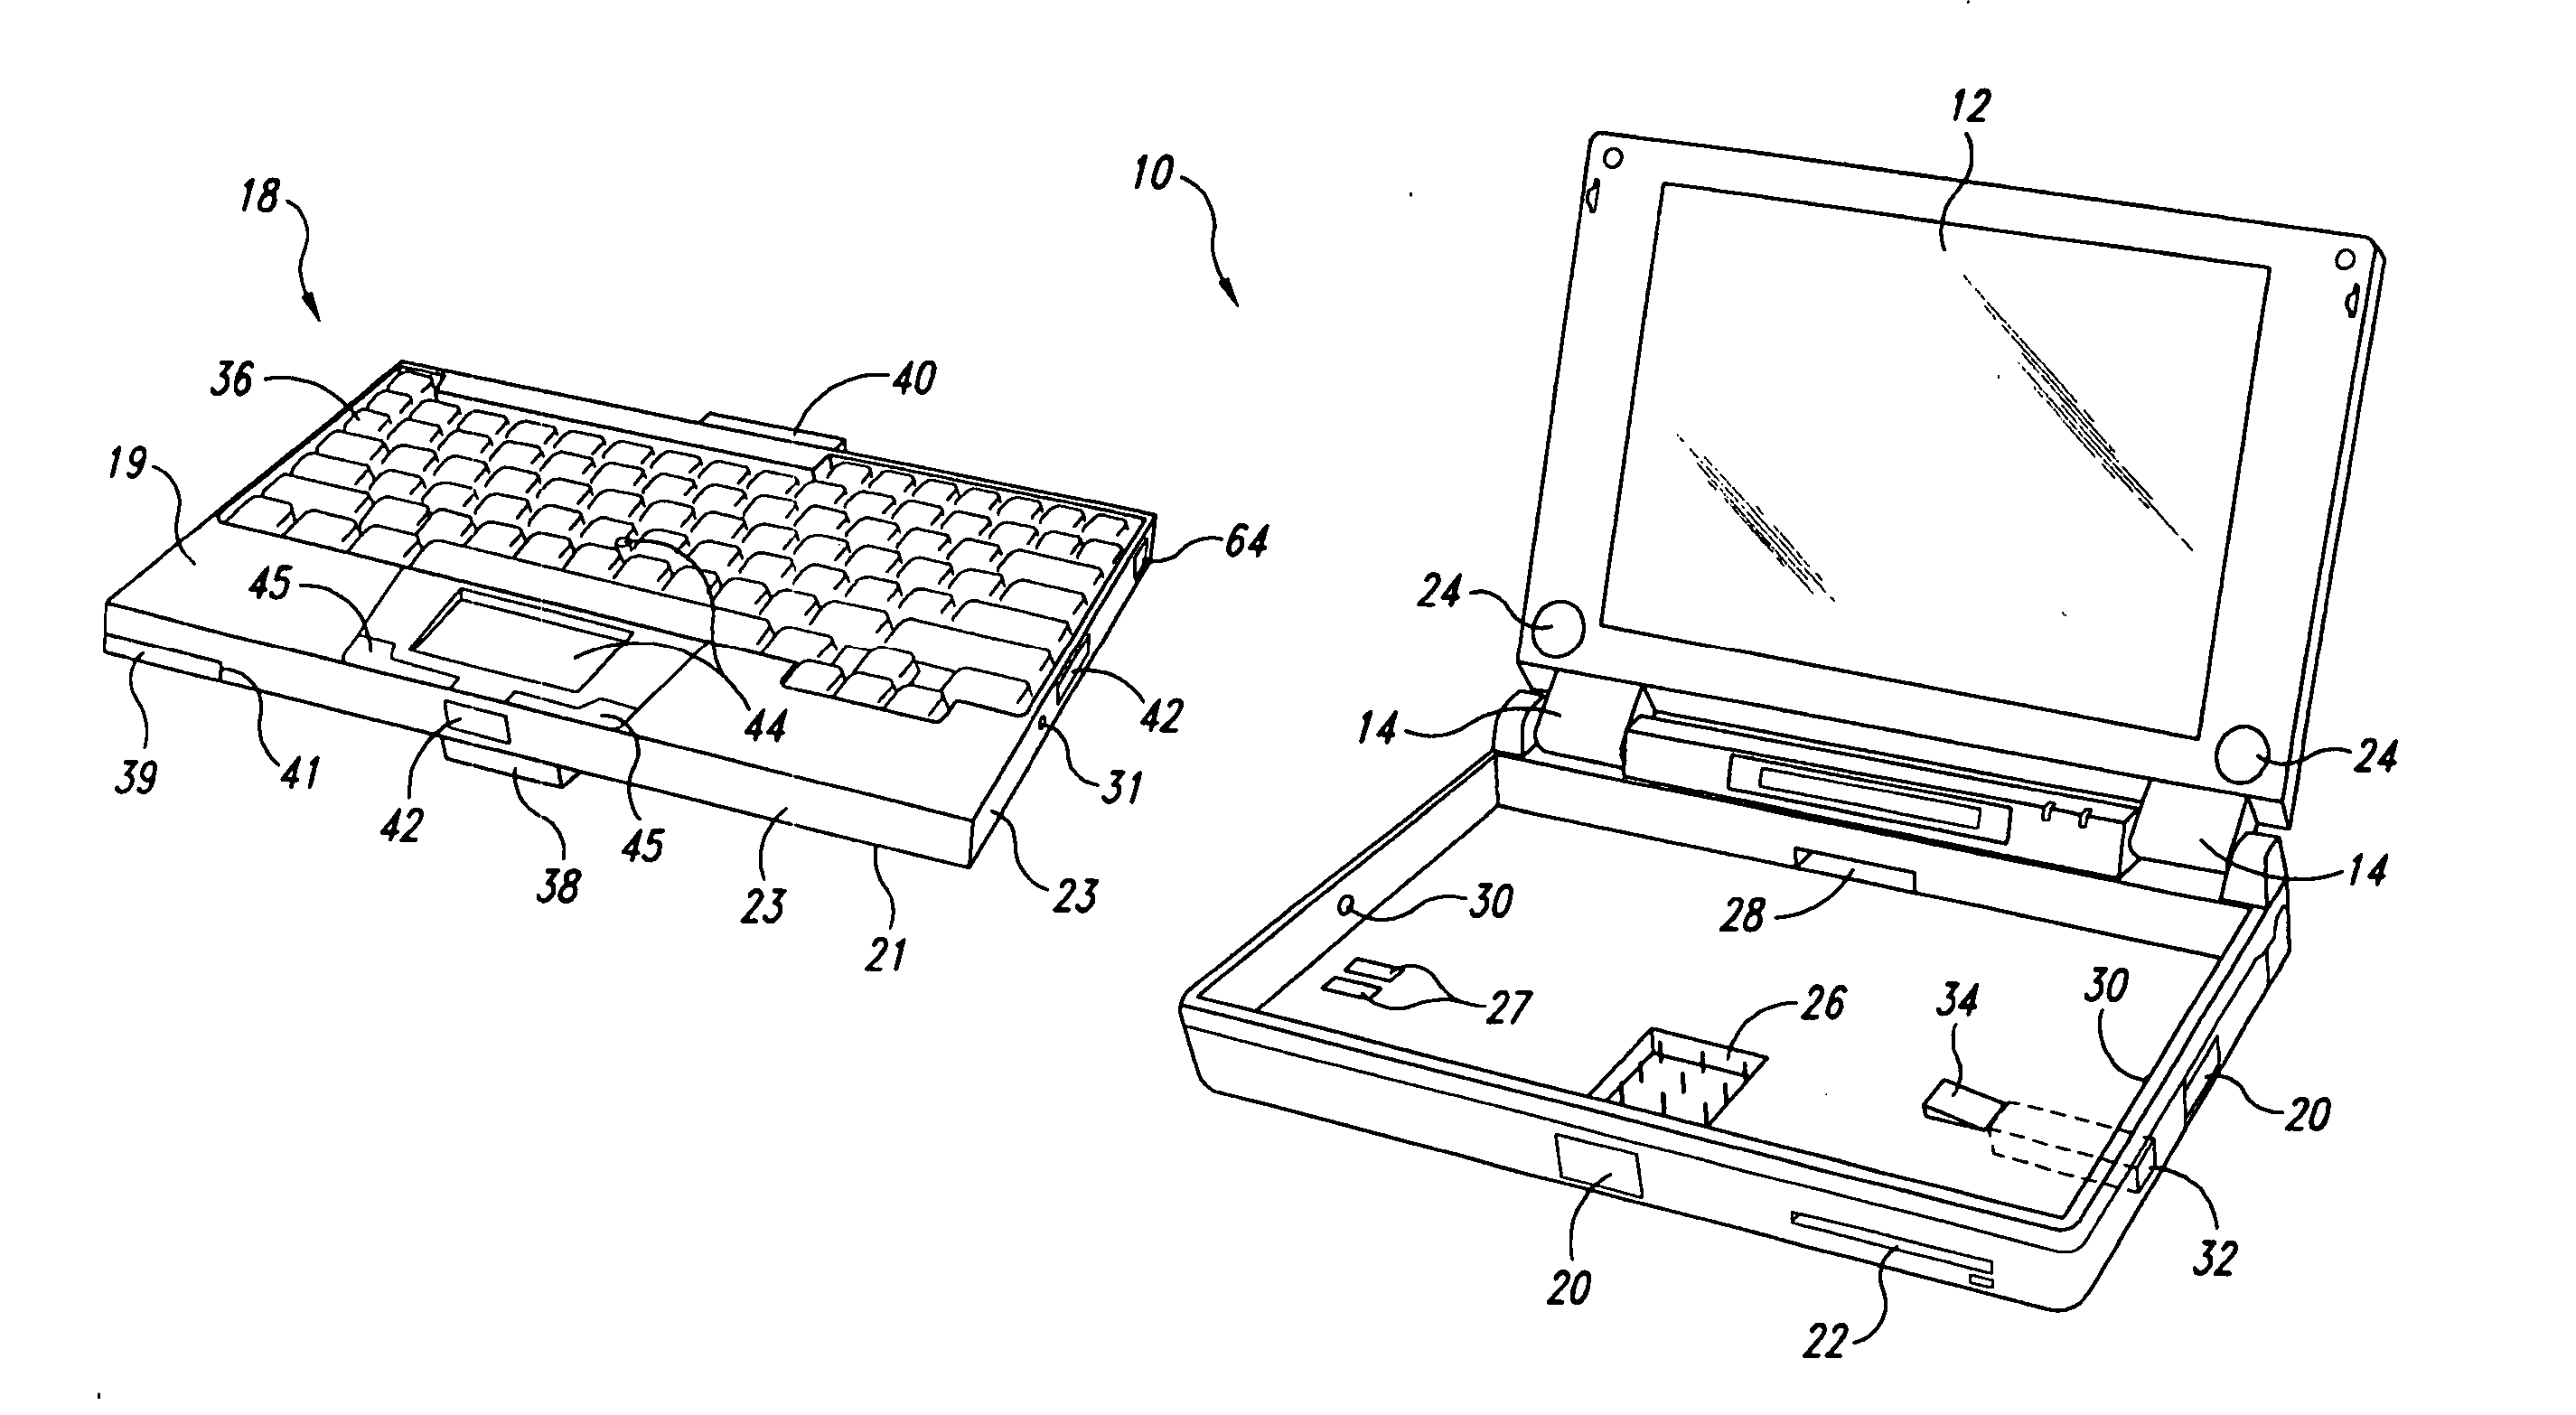 Portable input device for computer